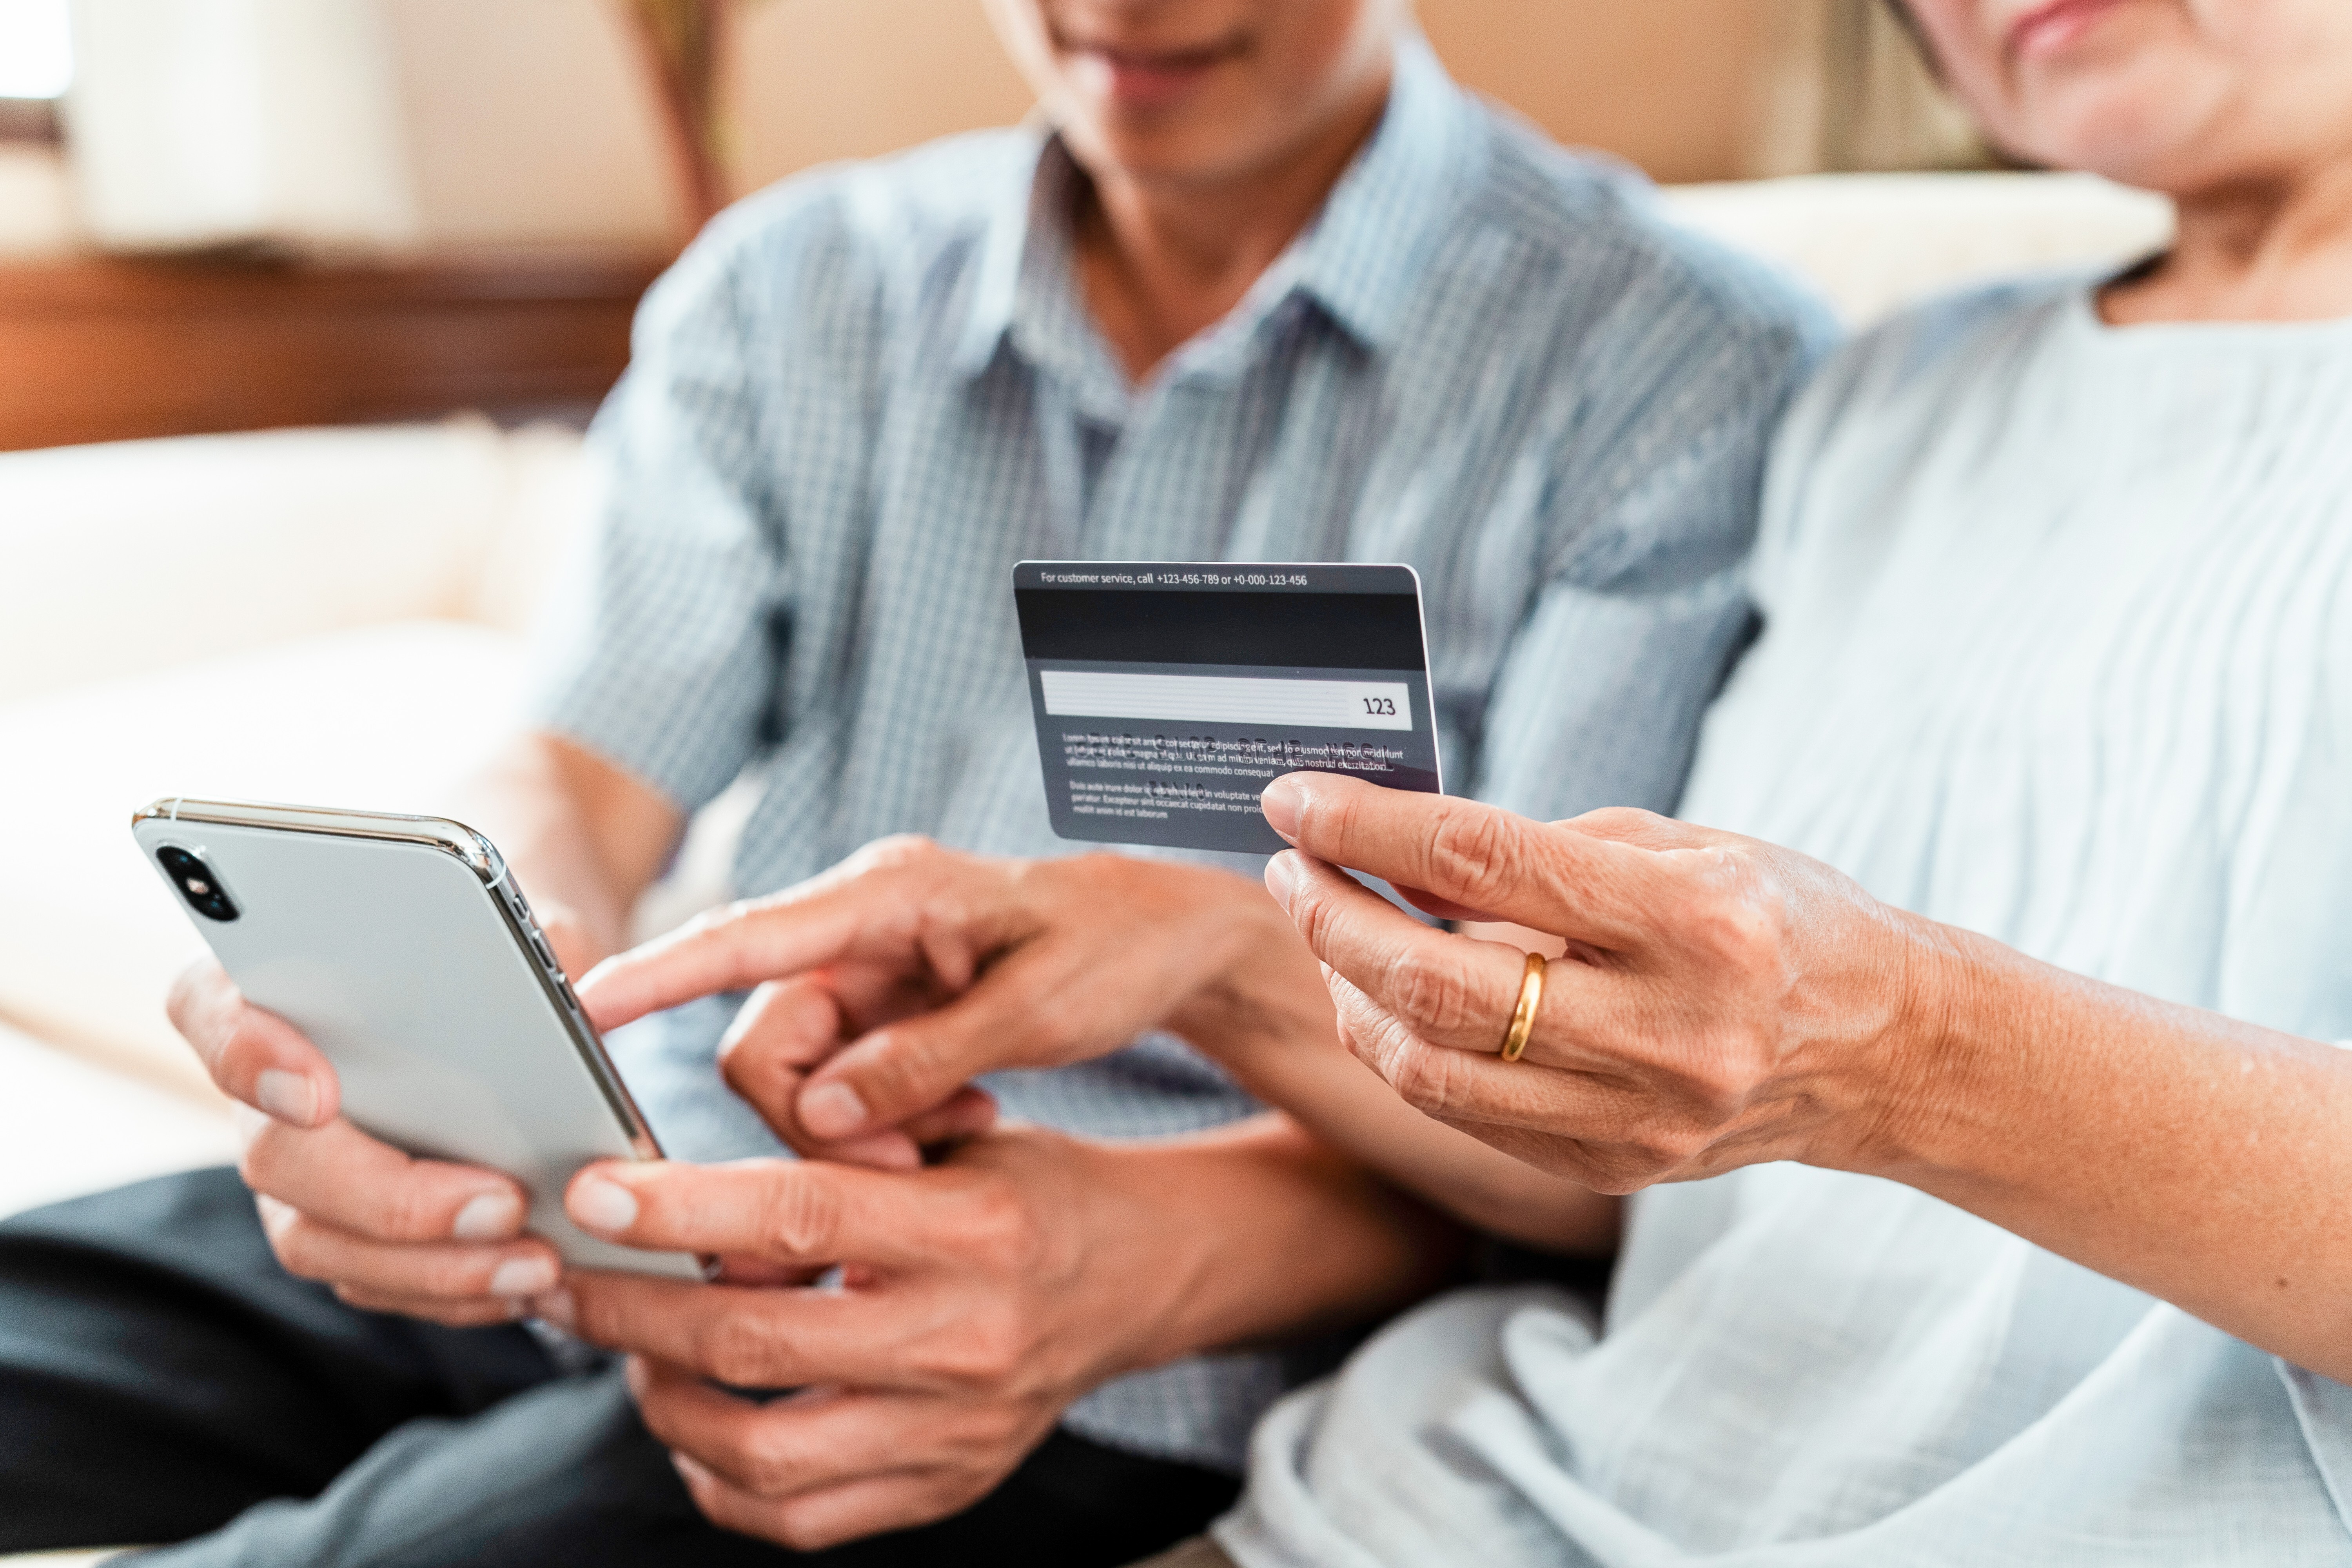 Older people in China are doing more of their own shopping online. Photo: Shutterstock